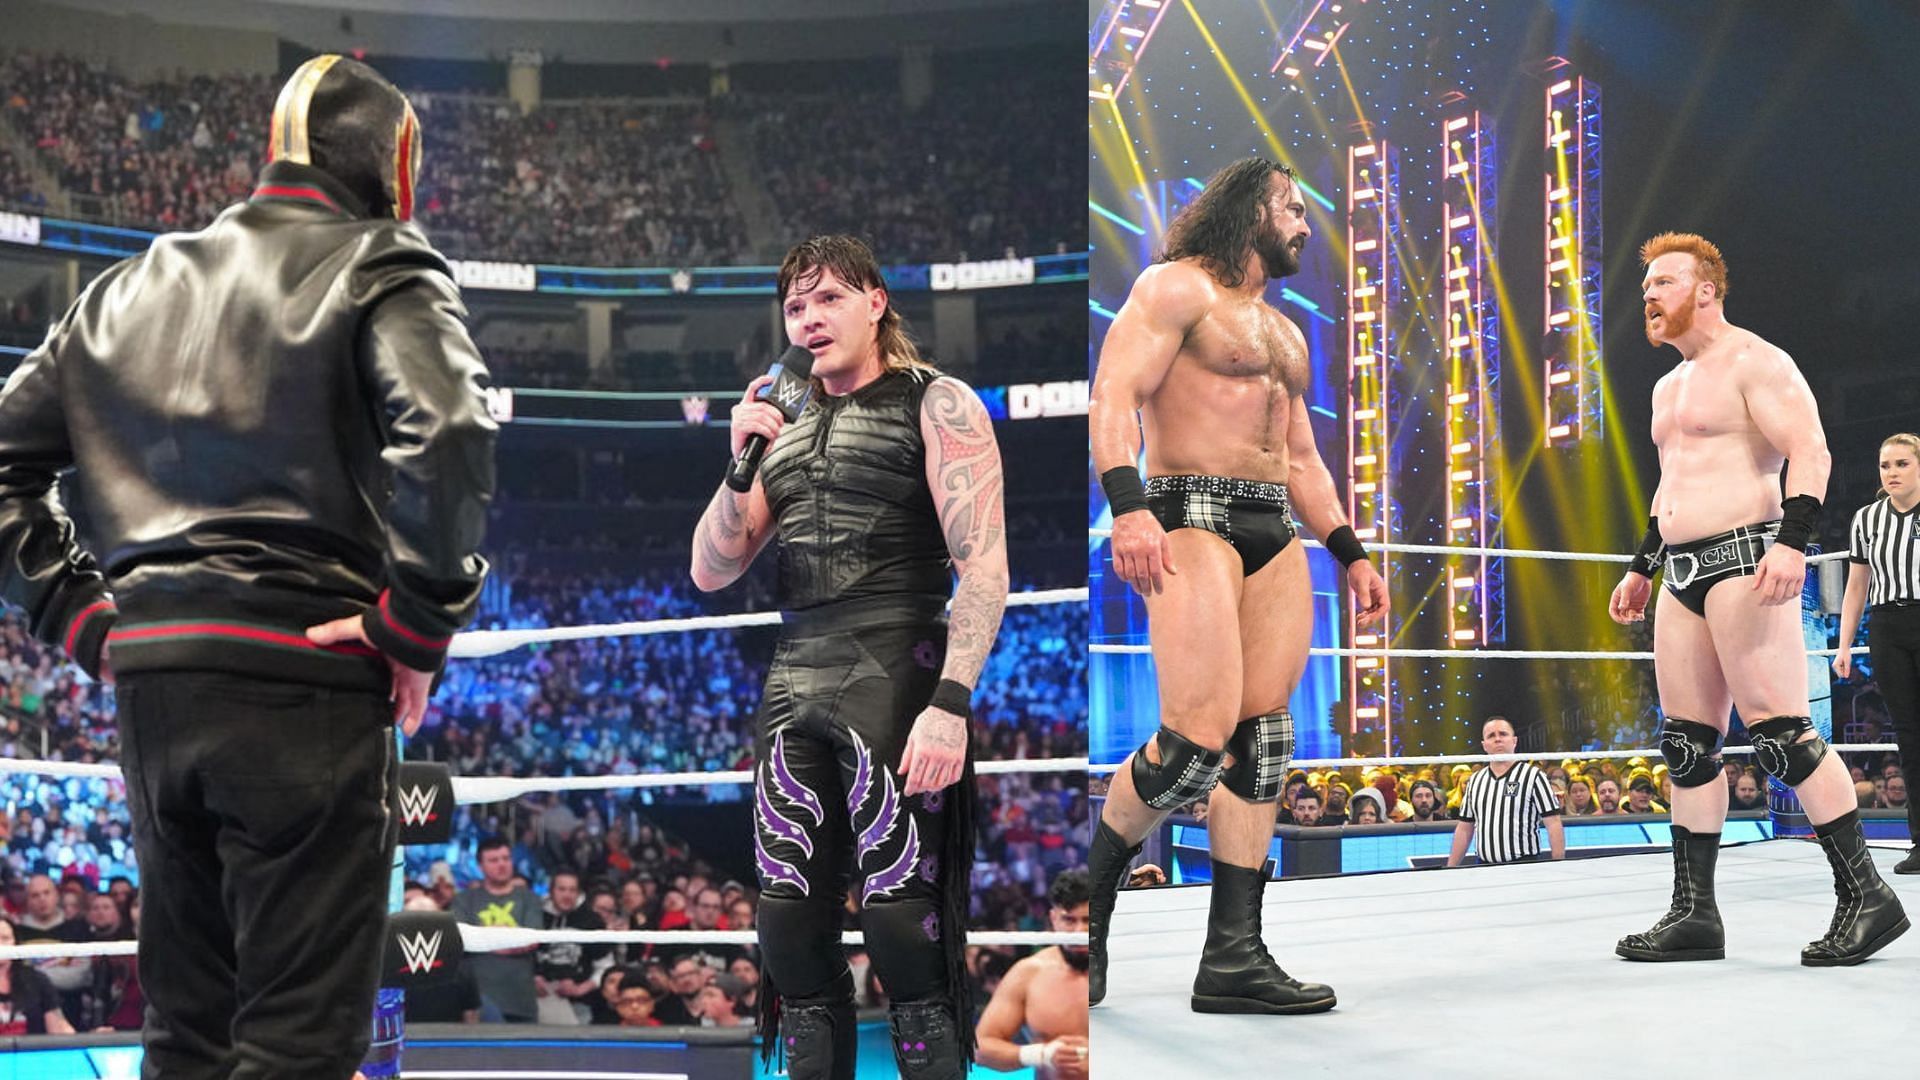 WWE SmackDown will shake things up on The Road to WrestleMania